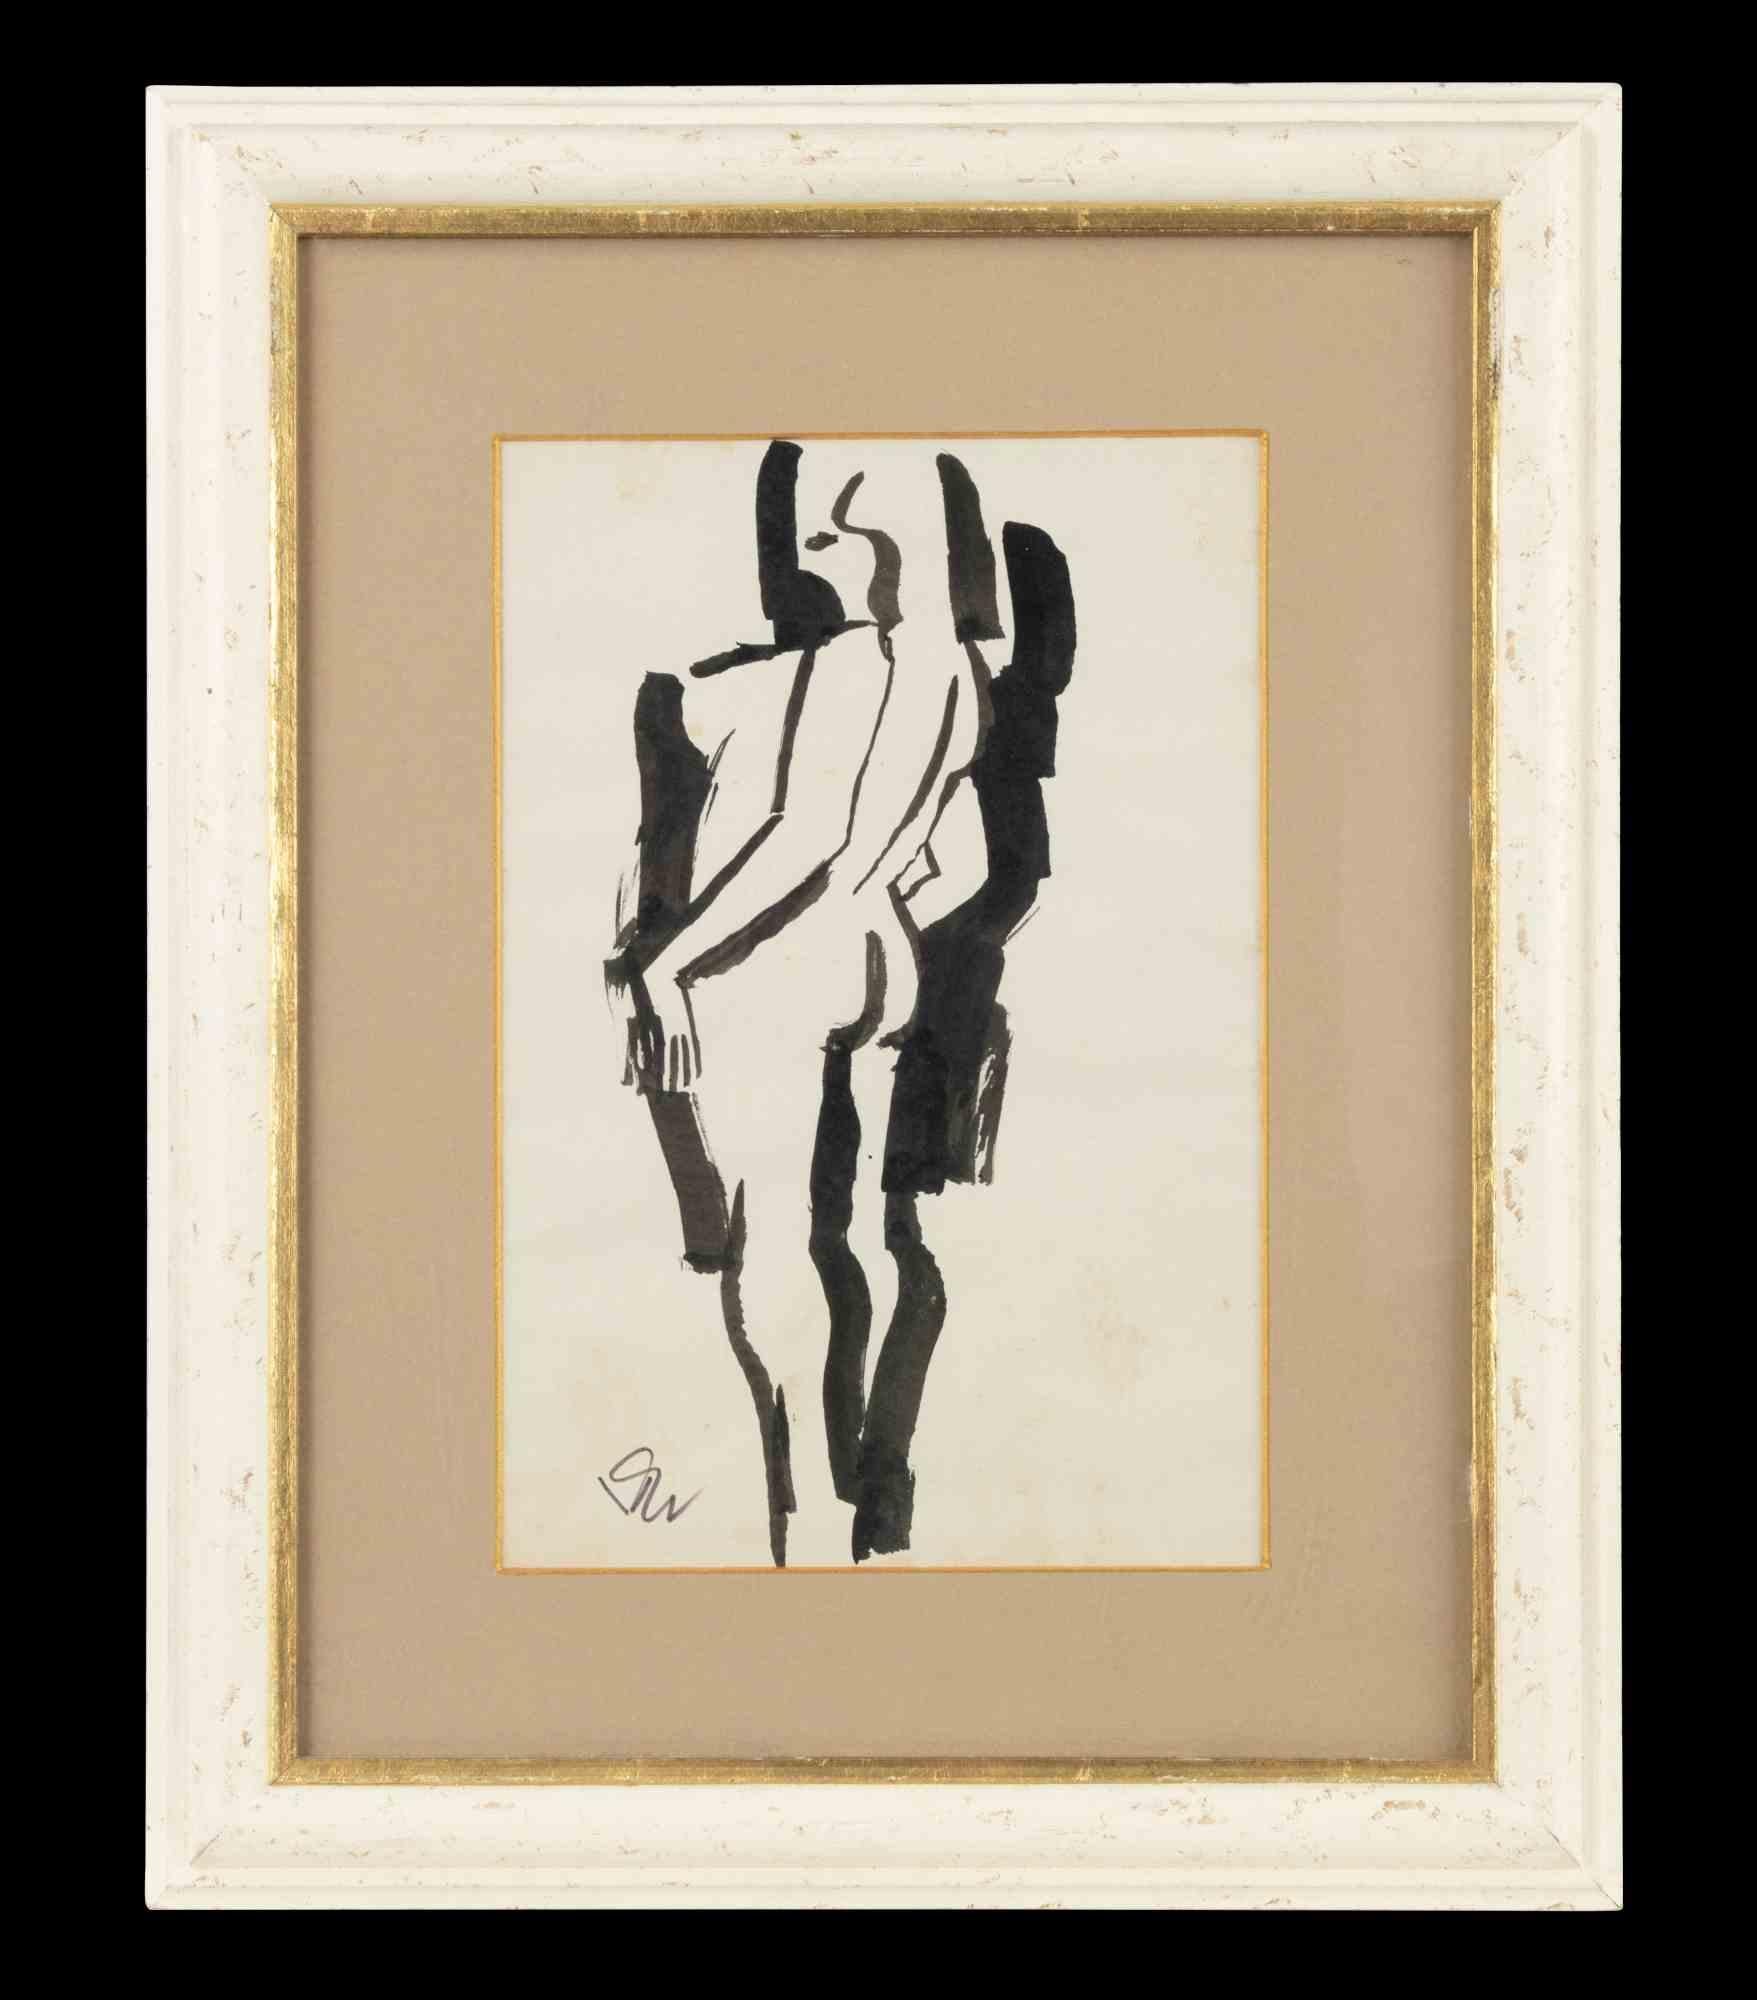 Female Nude is a modern artwork realized by Luca Venna in the half of 20th Century.

Black and white watercolor on paper.

Hand signed on the lower marign.

Includes frame.